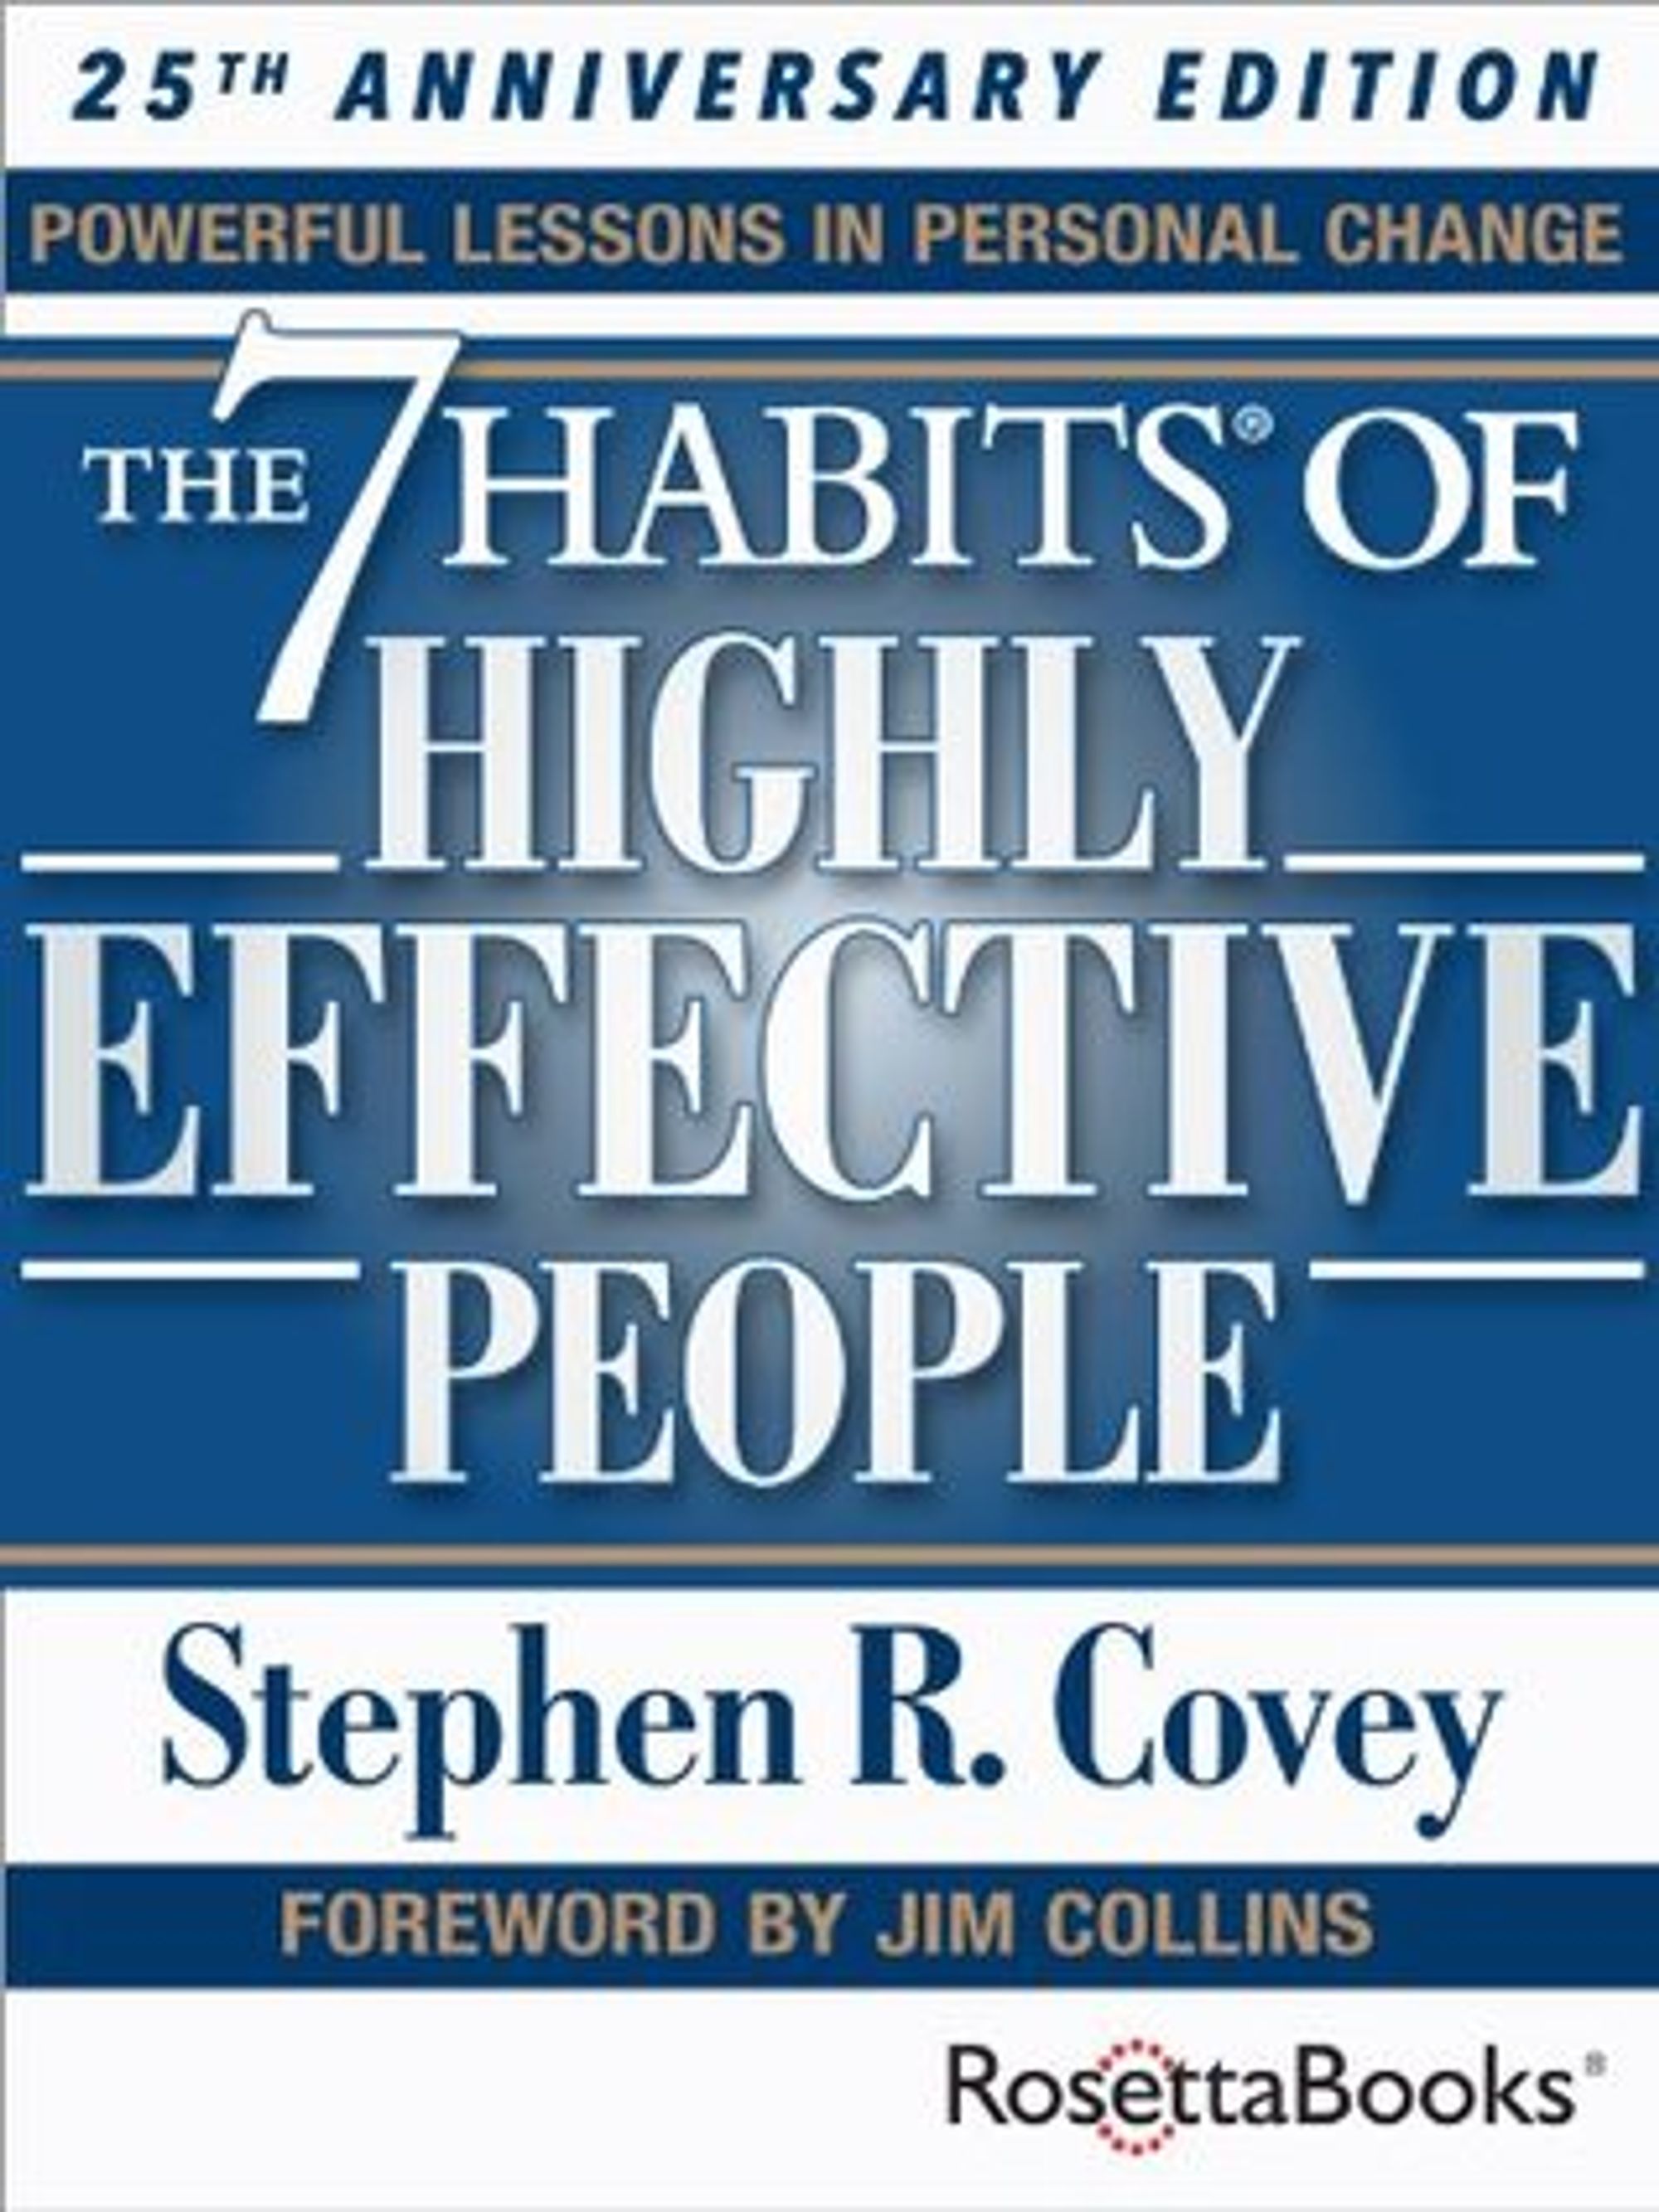 A quote from The 7 Habits of Highly Effective People